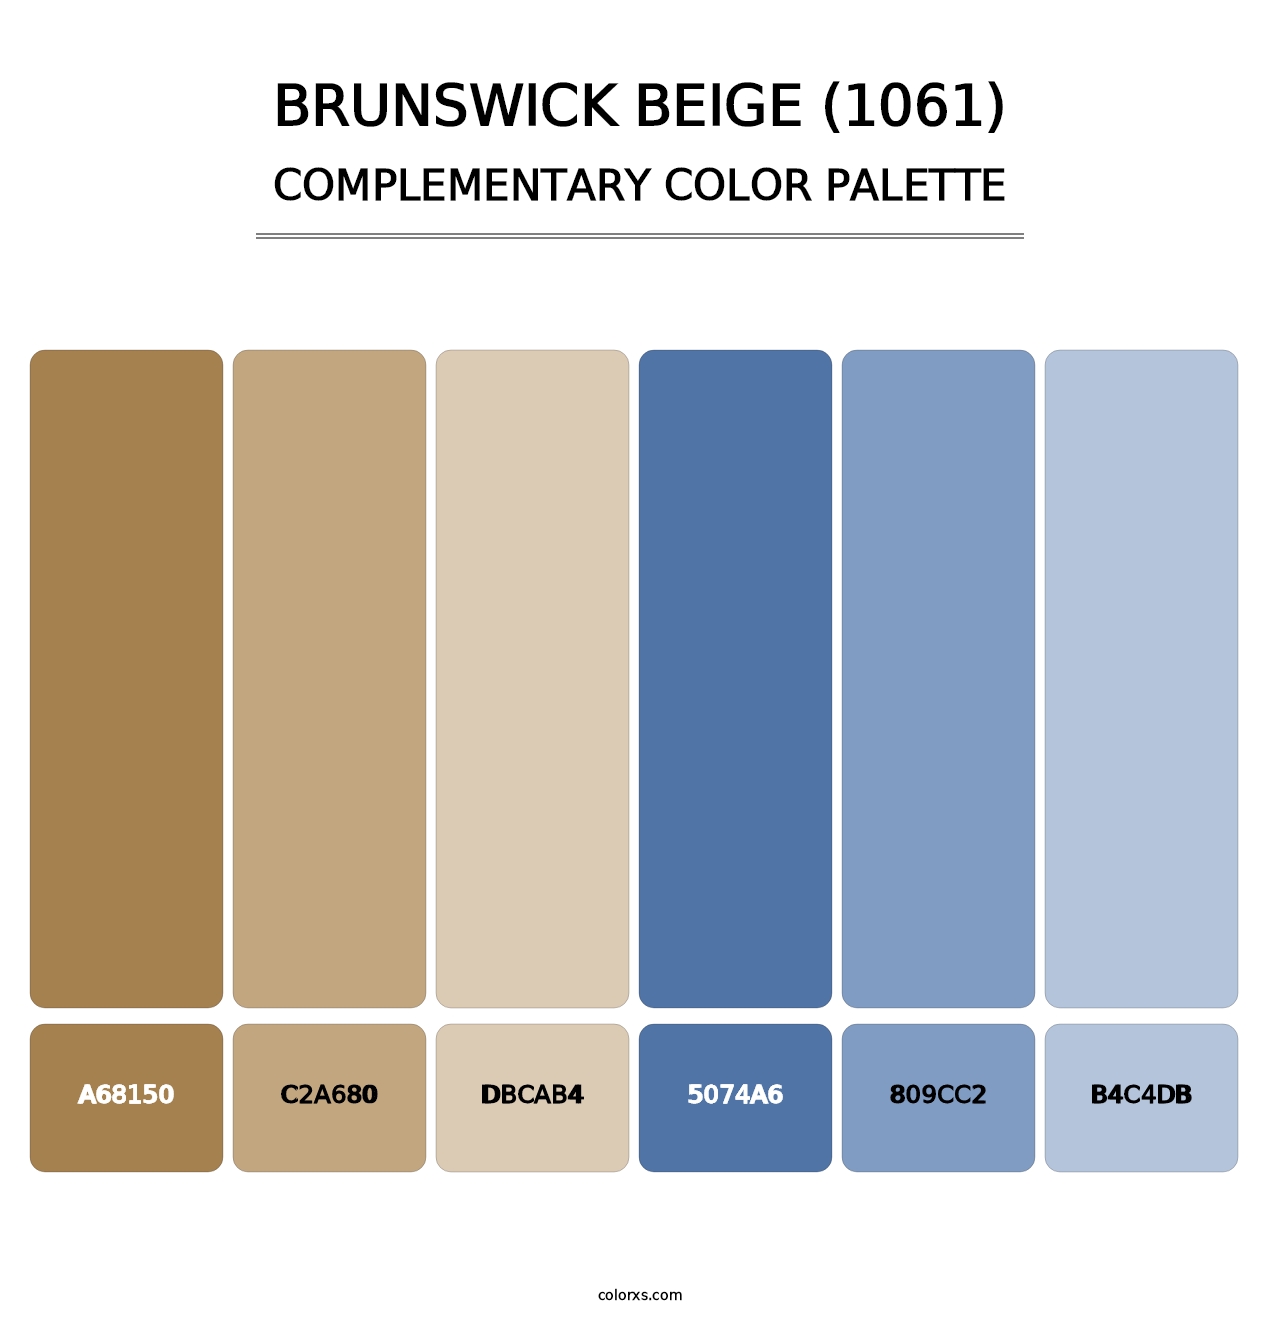 Brunswick Beige (1061) - Complementary Color Palette